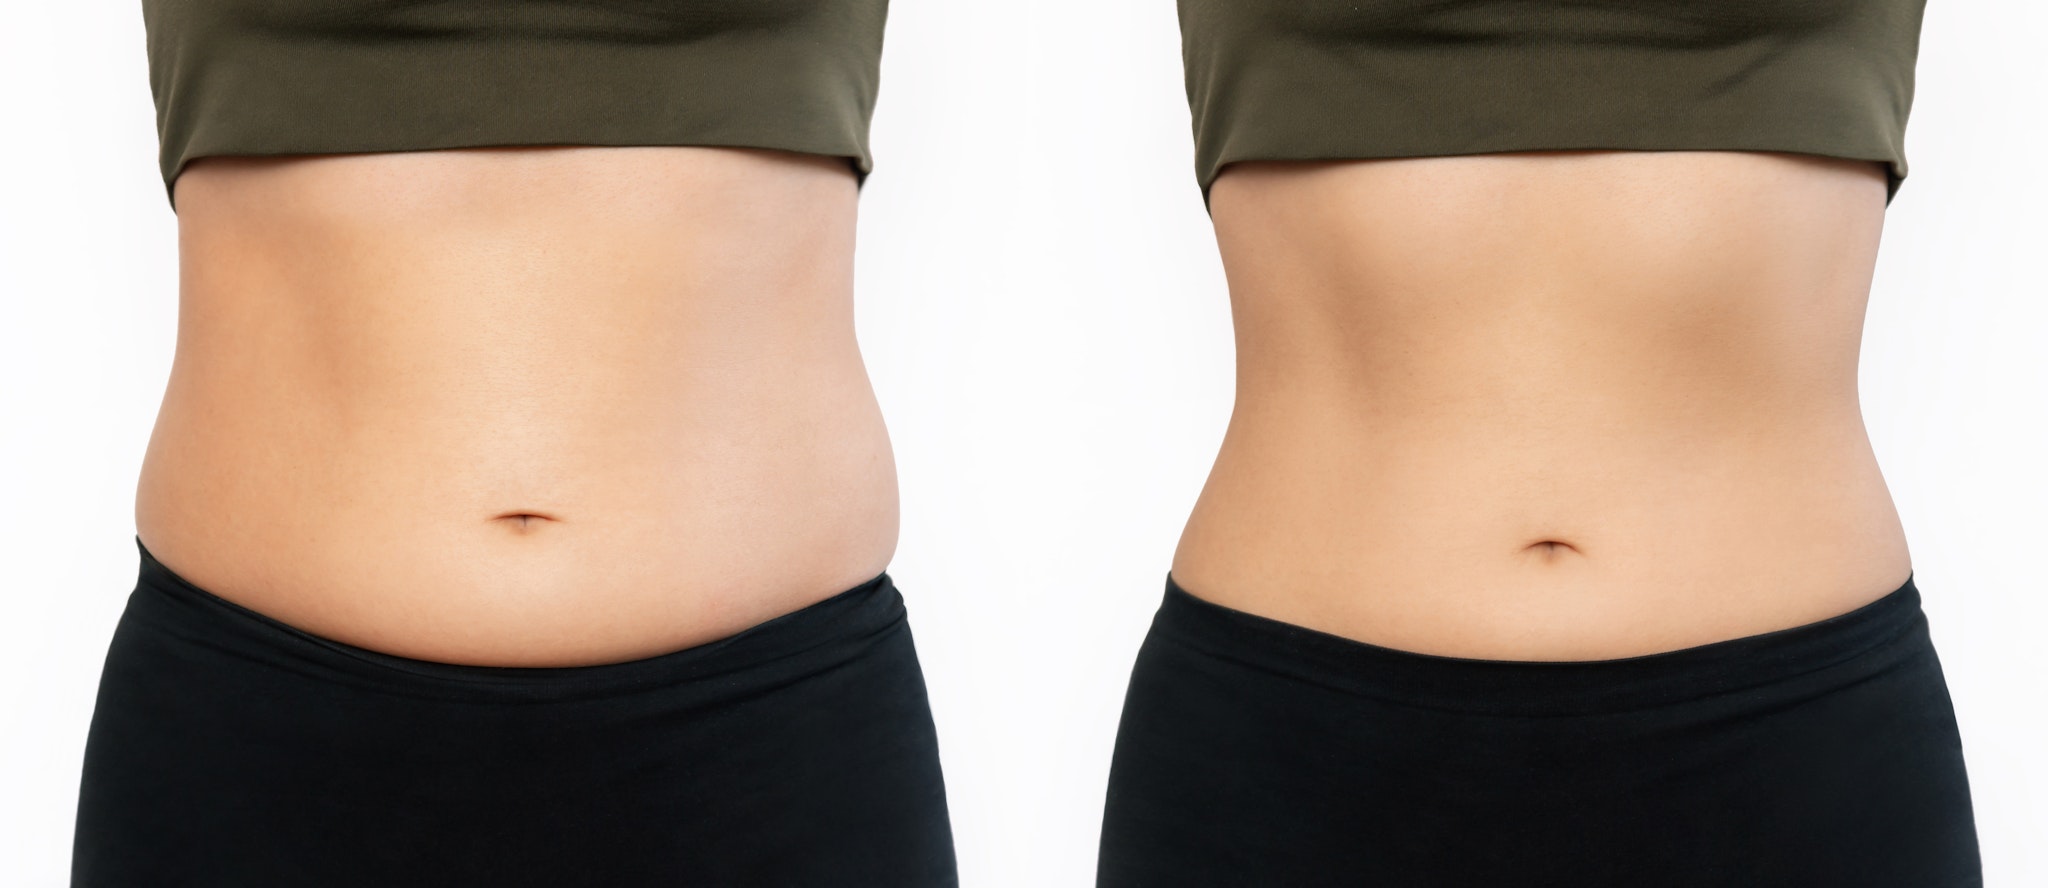 Abdominal Fat Removal Results: 4 Things To Look For